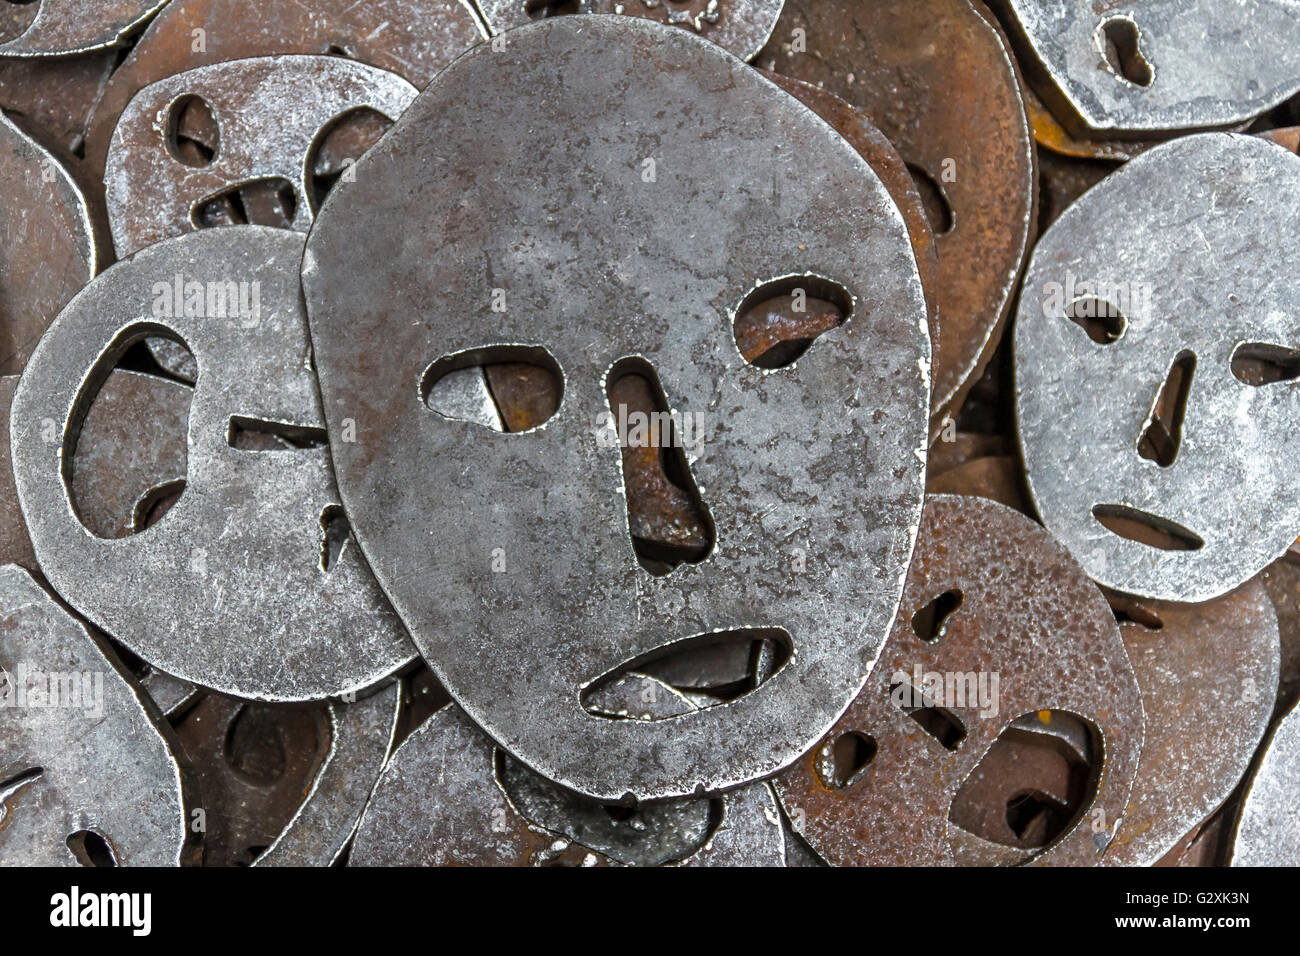 Shalekhet - fallen leaves, installation of metal faces with open mouths, cut from heavy round iron plates covers the floor,in The Jewish Museum Berlin Stock Photo